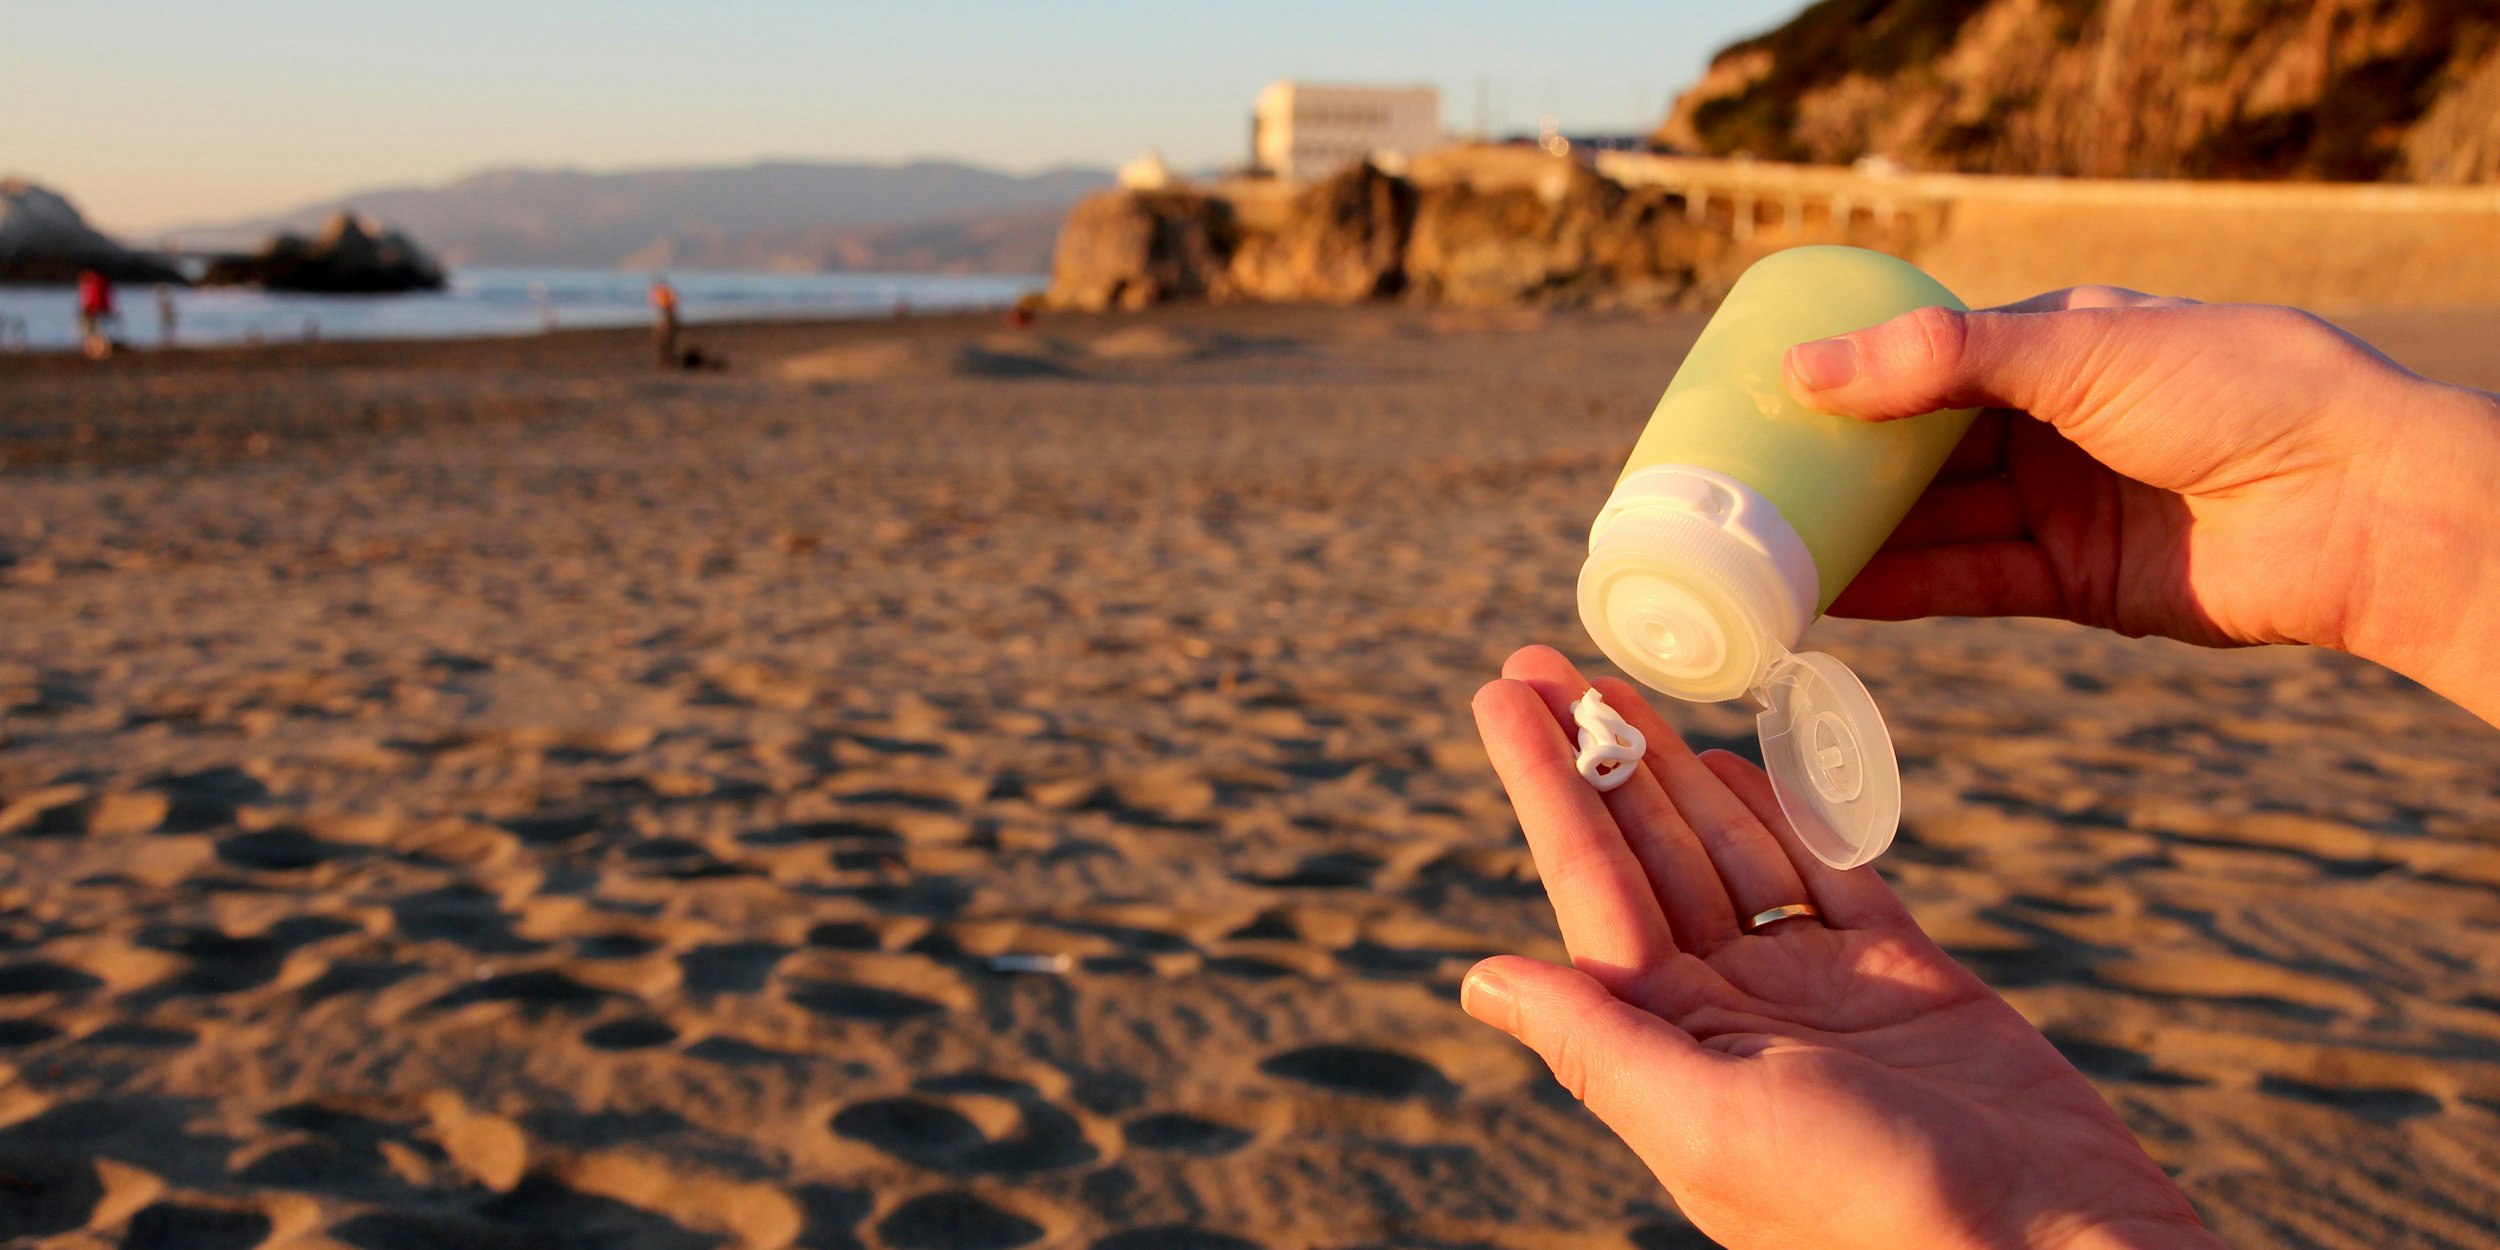 A pair of caucasian hands wearing a gold wedding band squeeze a white cream from a light green humangear GoToob+ on a beach where an out of focus rocky promontory with a white building on it sits in the distance and other beachgoers in red jackets can be seen